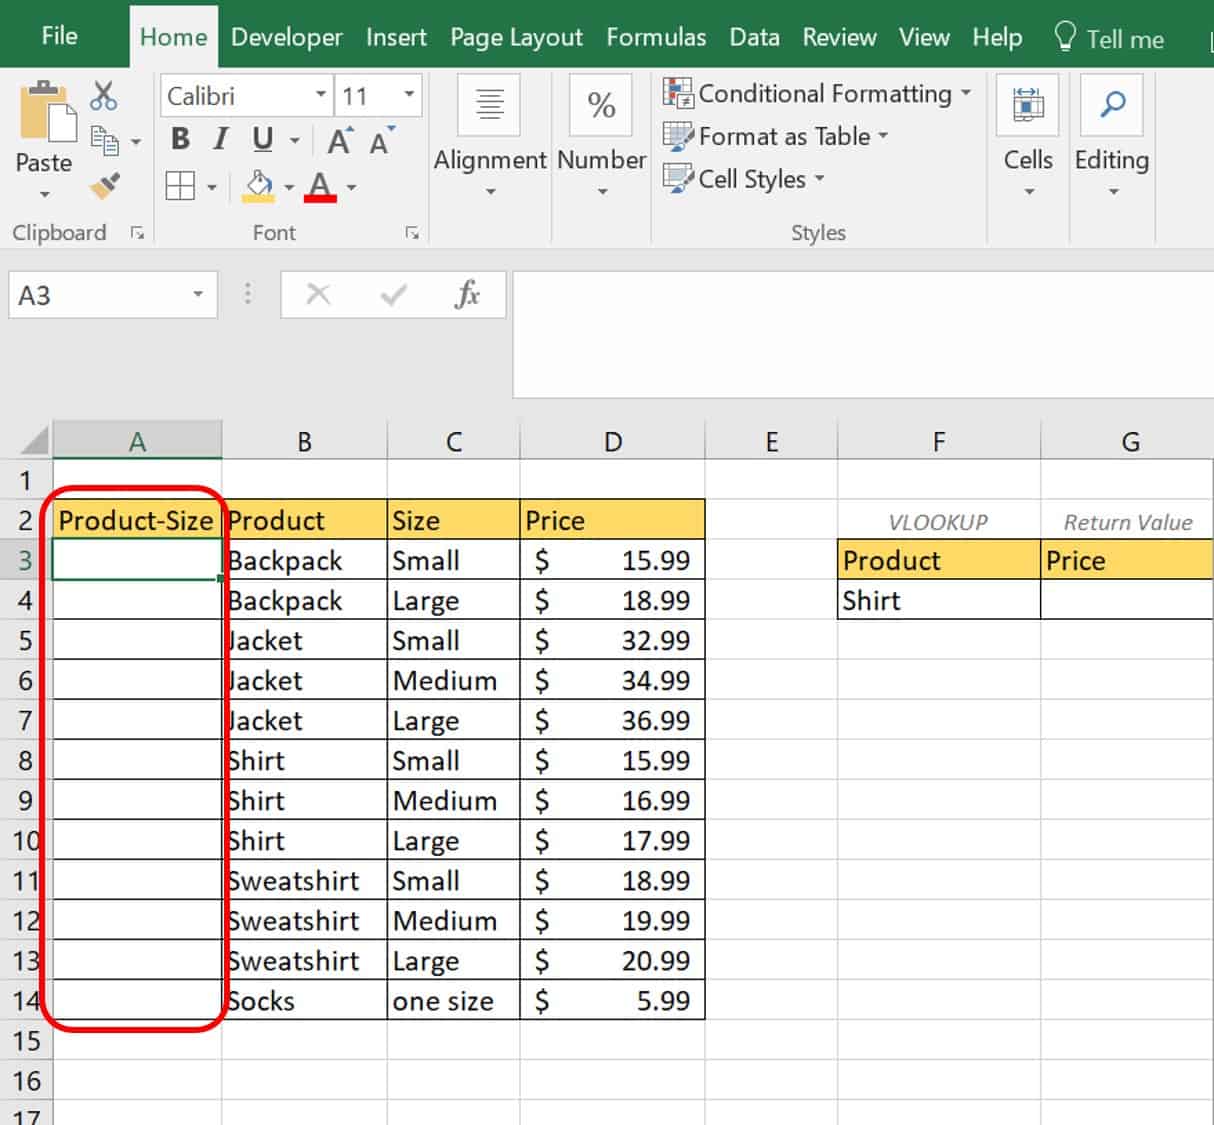 VLOOKUP examples